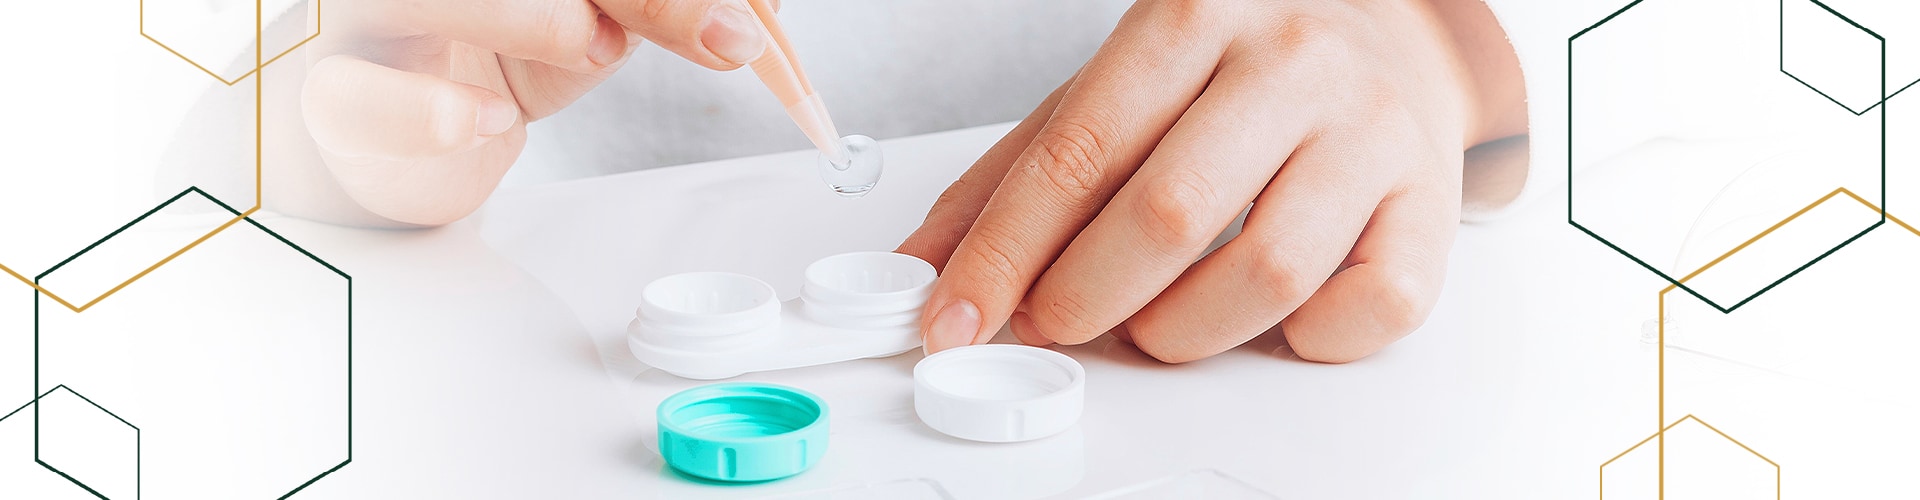 close up of hands holding contact lenses